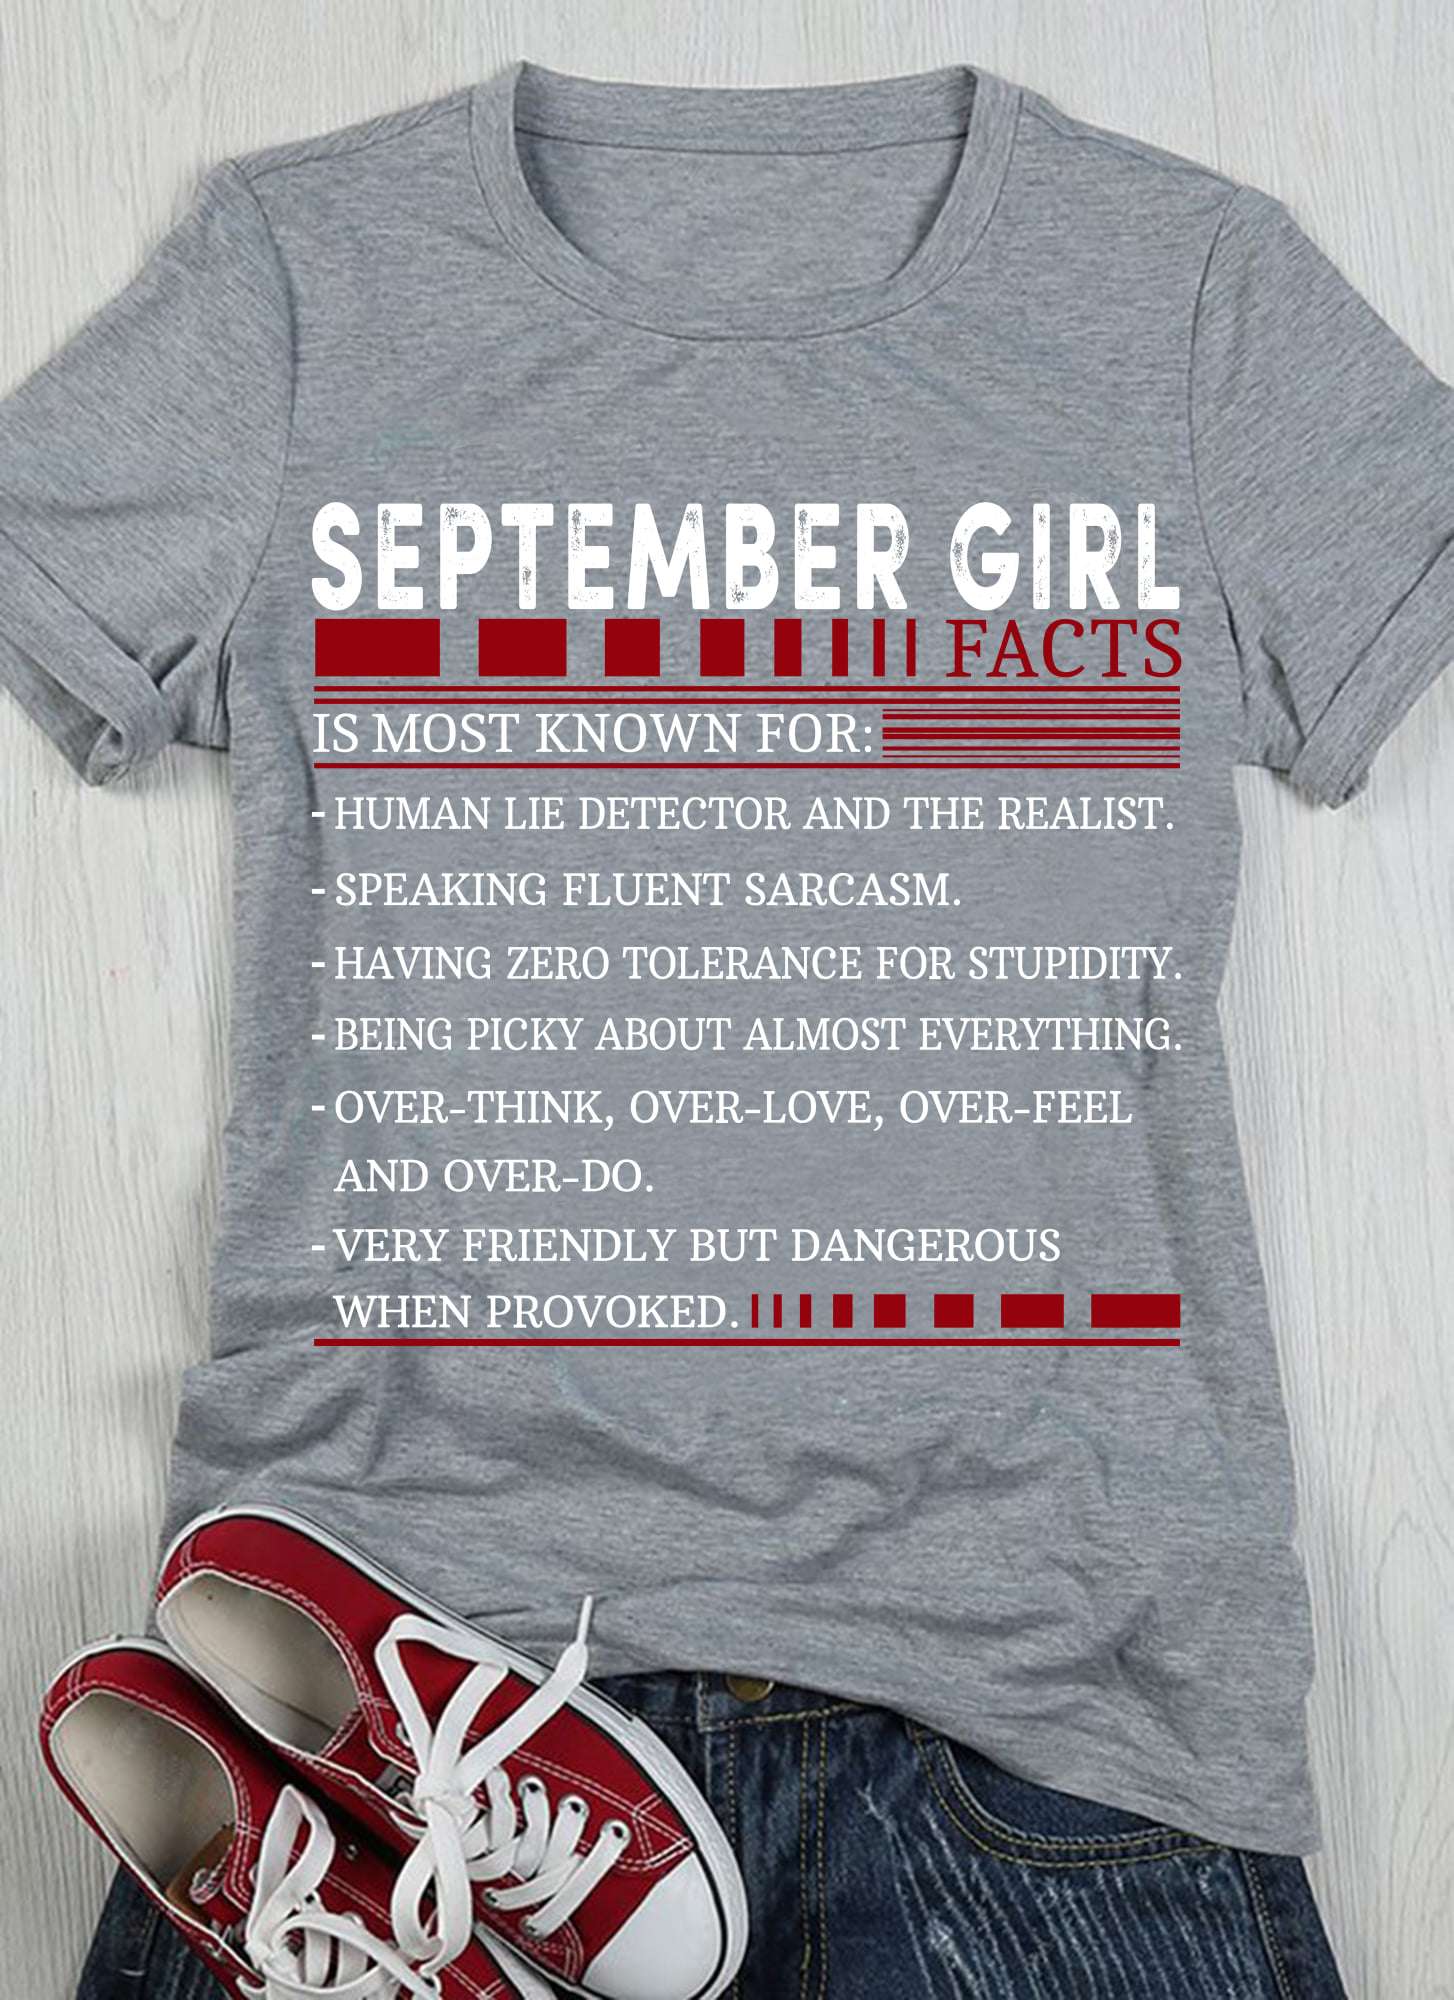 September Girl facts is most know for human lie detector anf the realist speaking fluent sarcasm